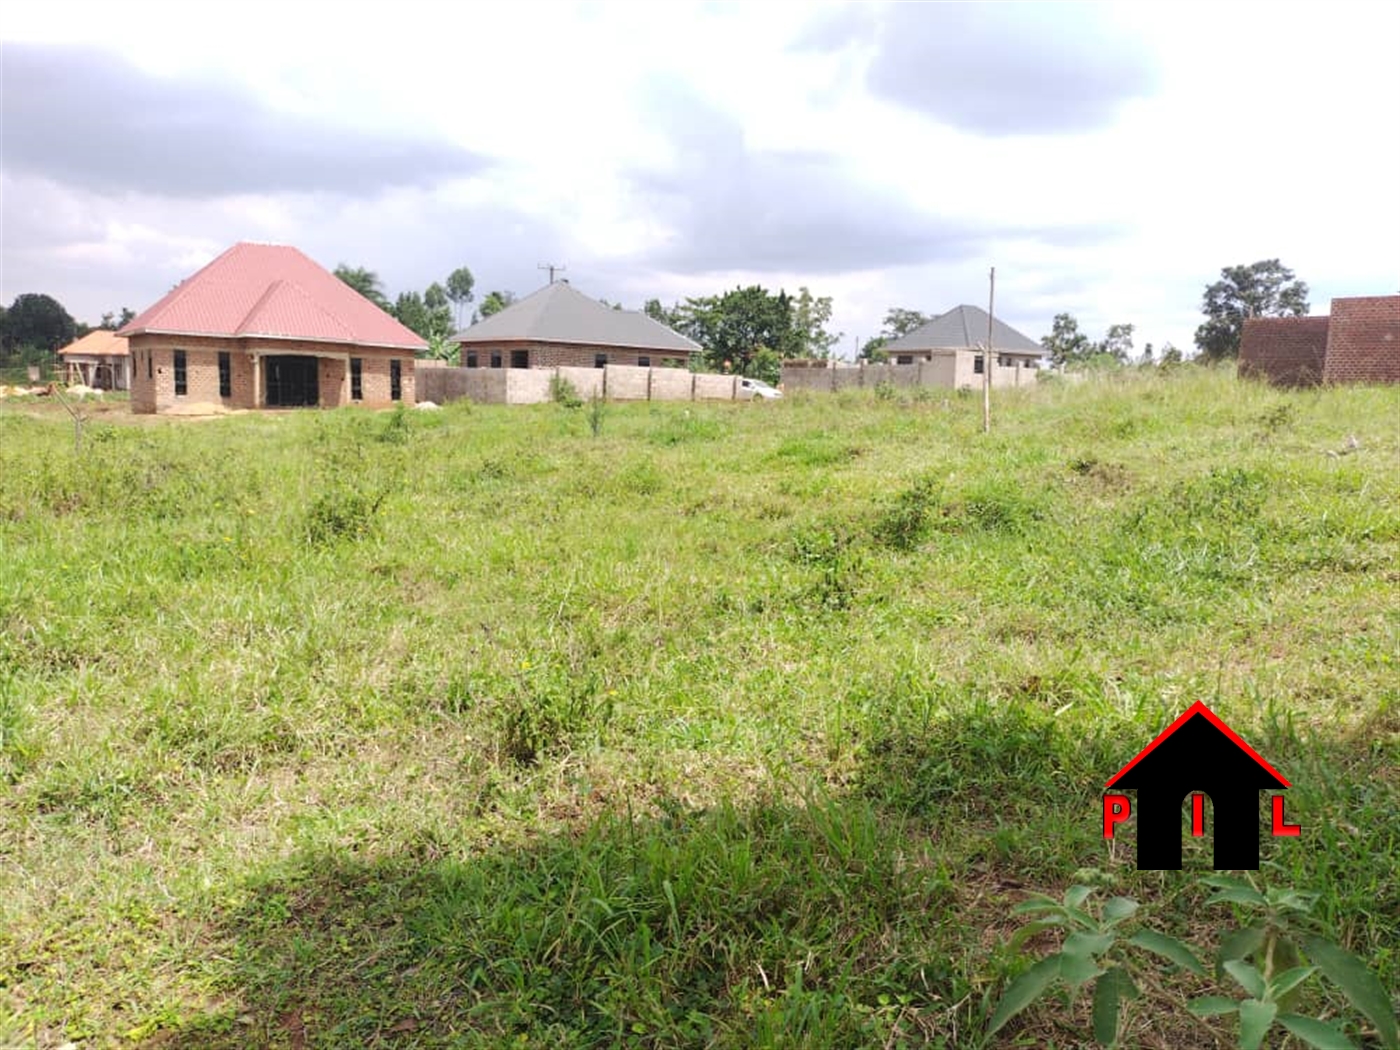 Commercial Land for sale in Temangalo Kampala